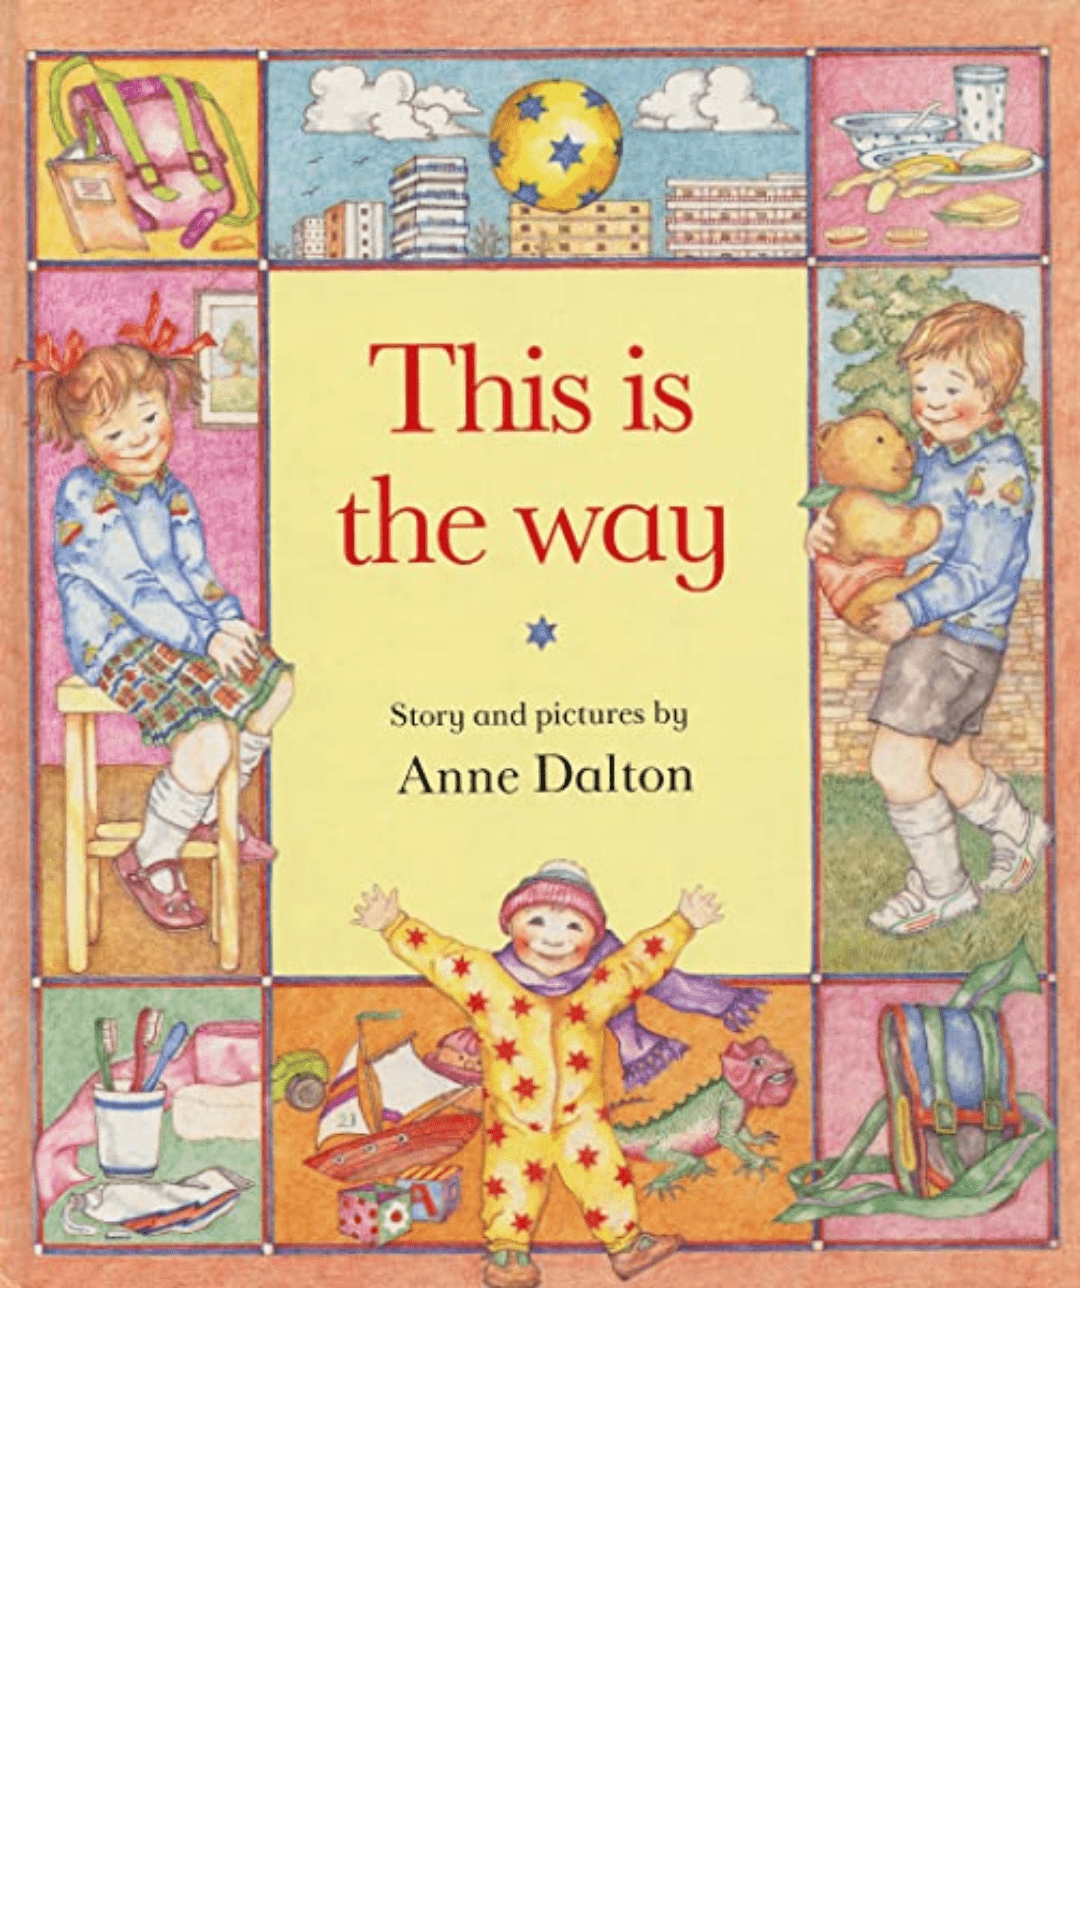 This is the Way by Anne Dalton